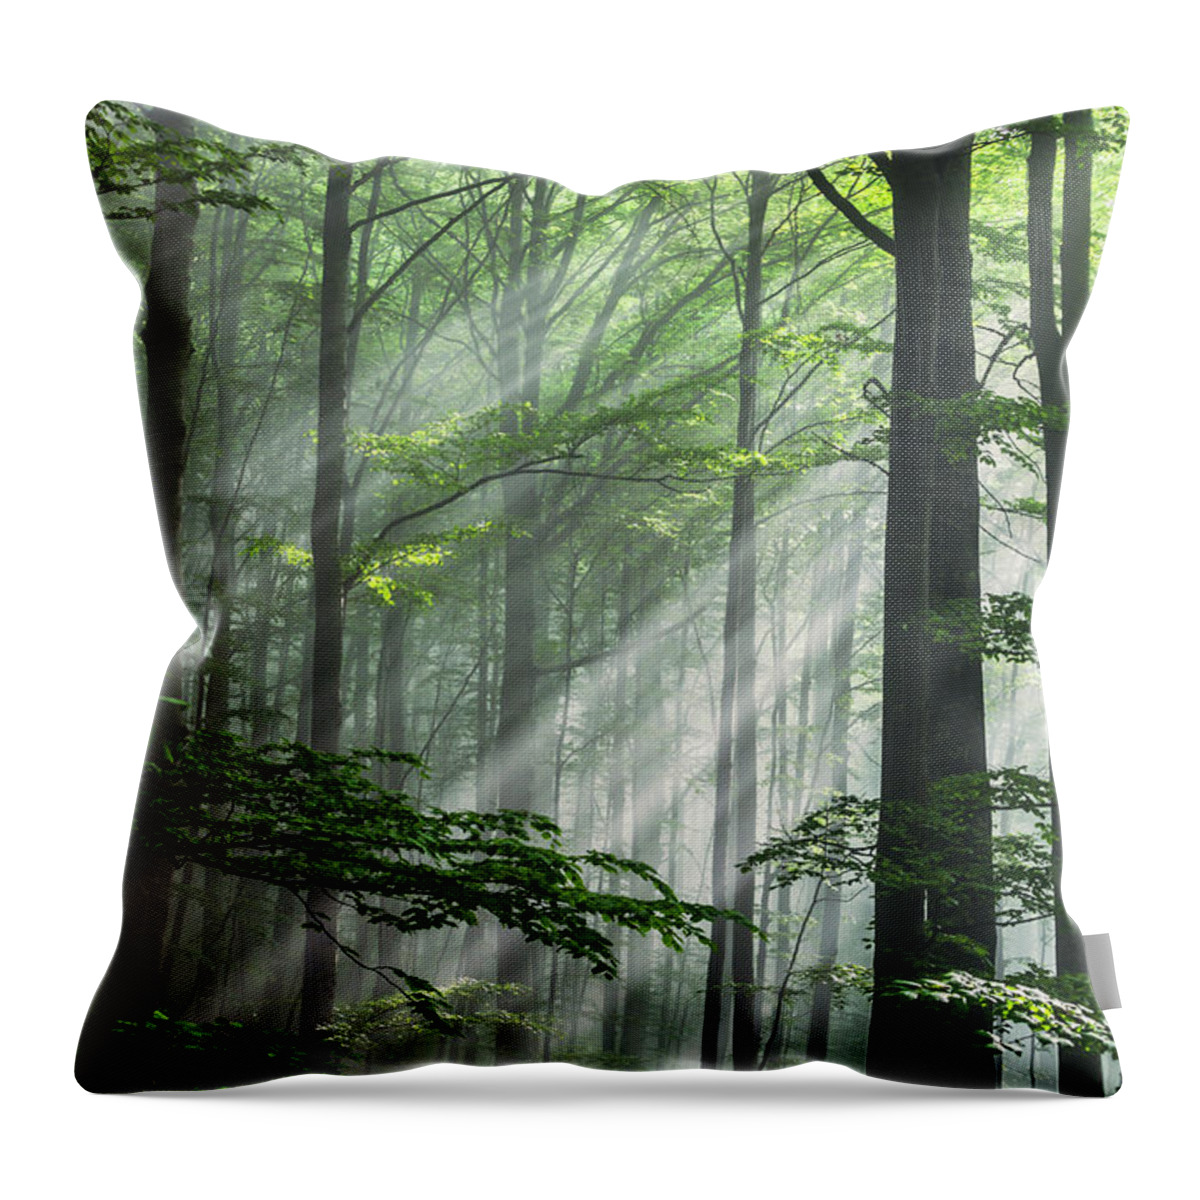 Fog Throw Pillow featuring the photograph Fleeting Beams by Evgeni Dinev